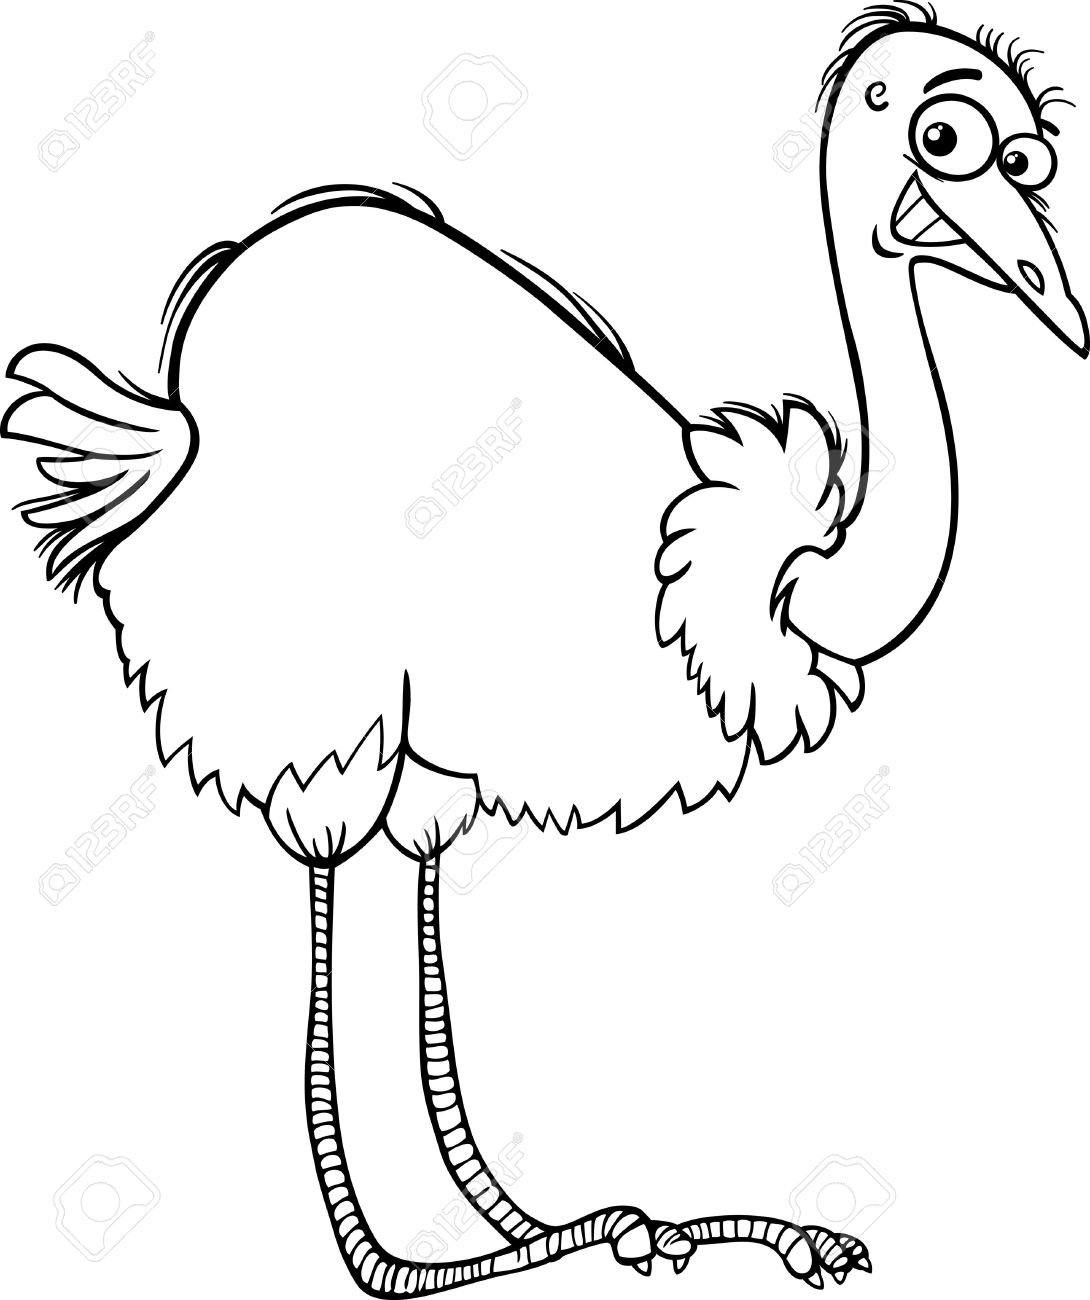 Ostrich Clipart Black And White.